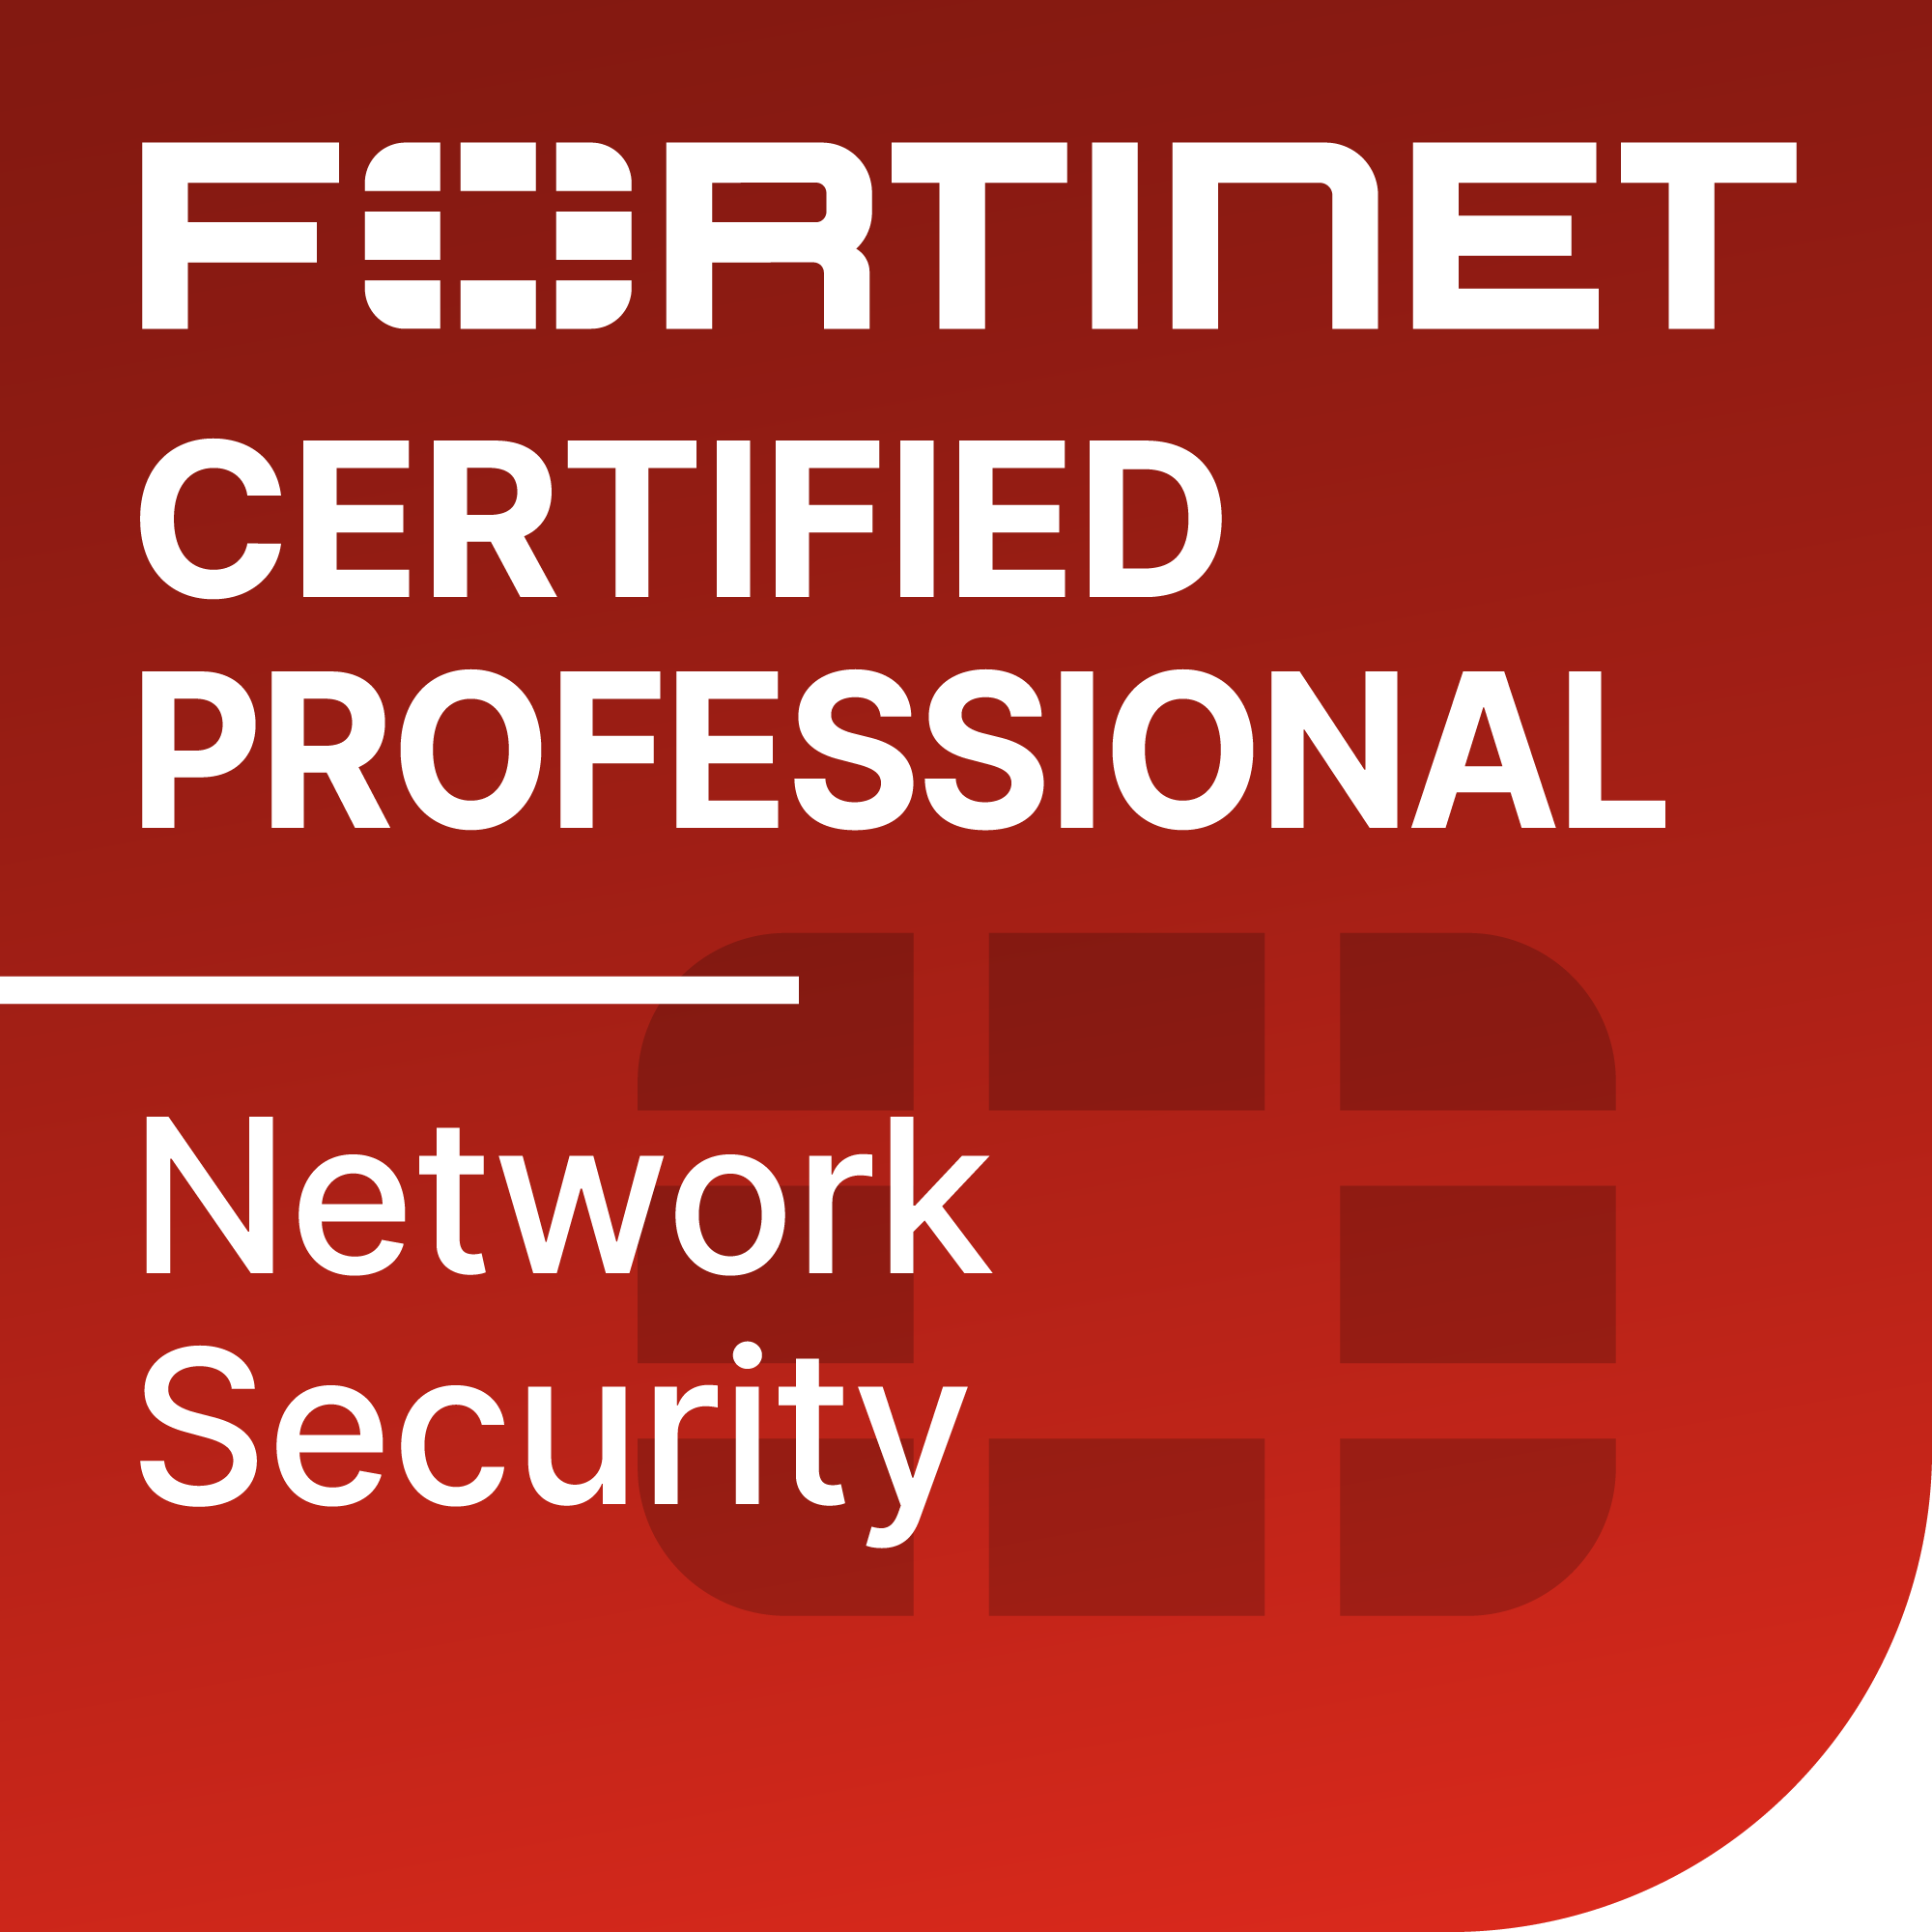 ftnt nse cert professional network security